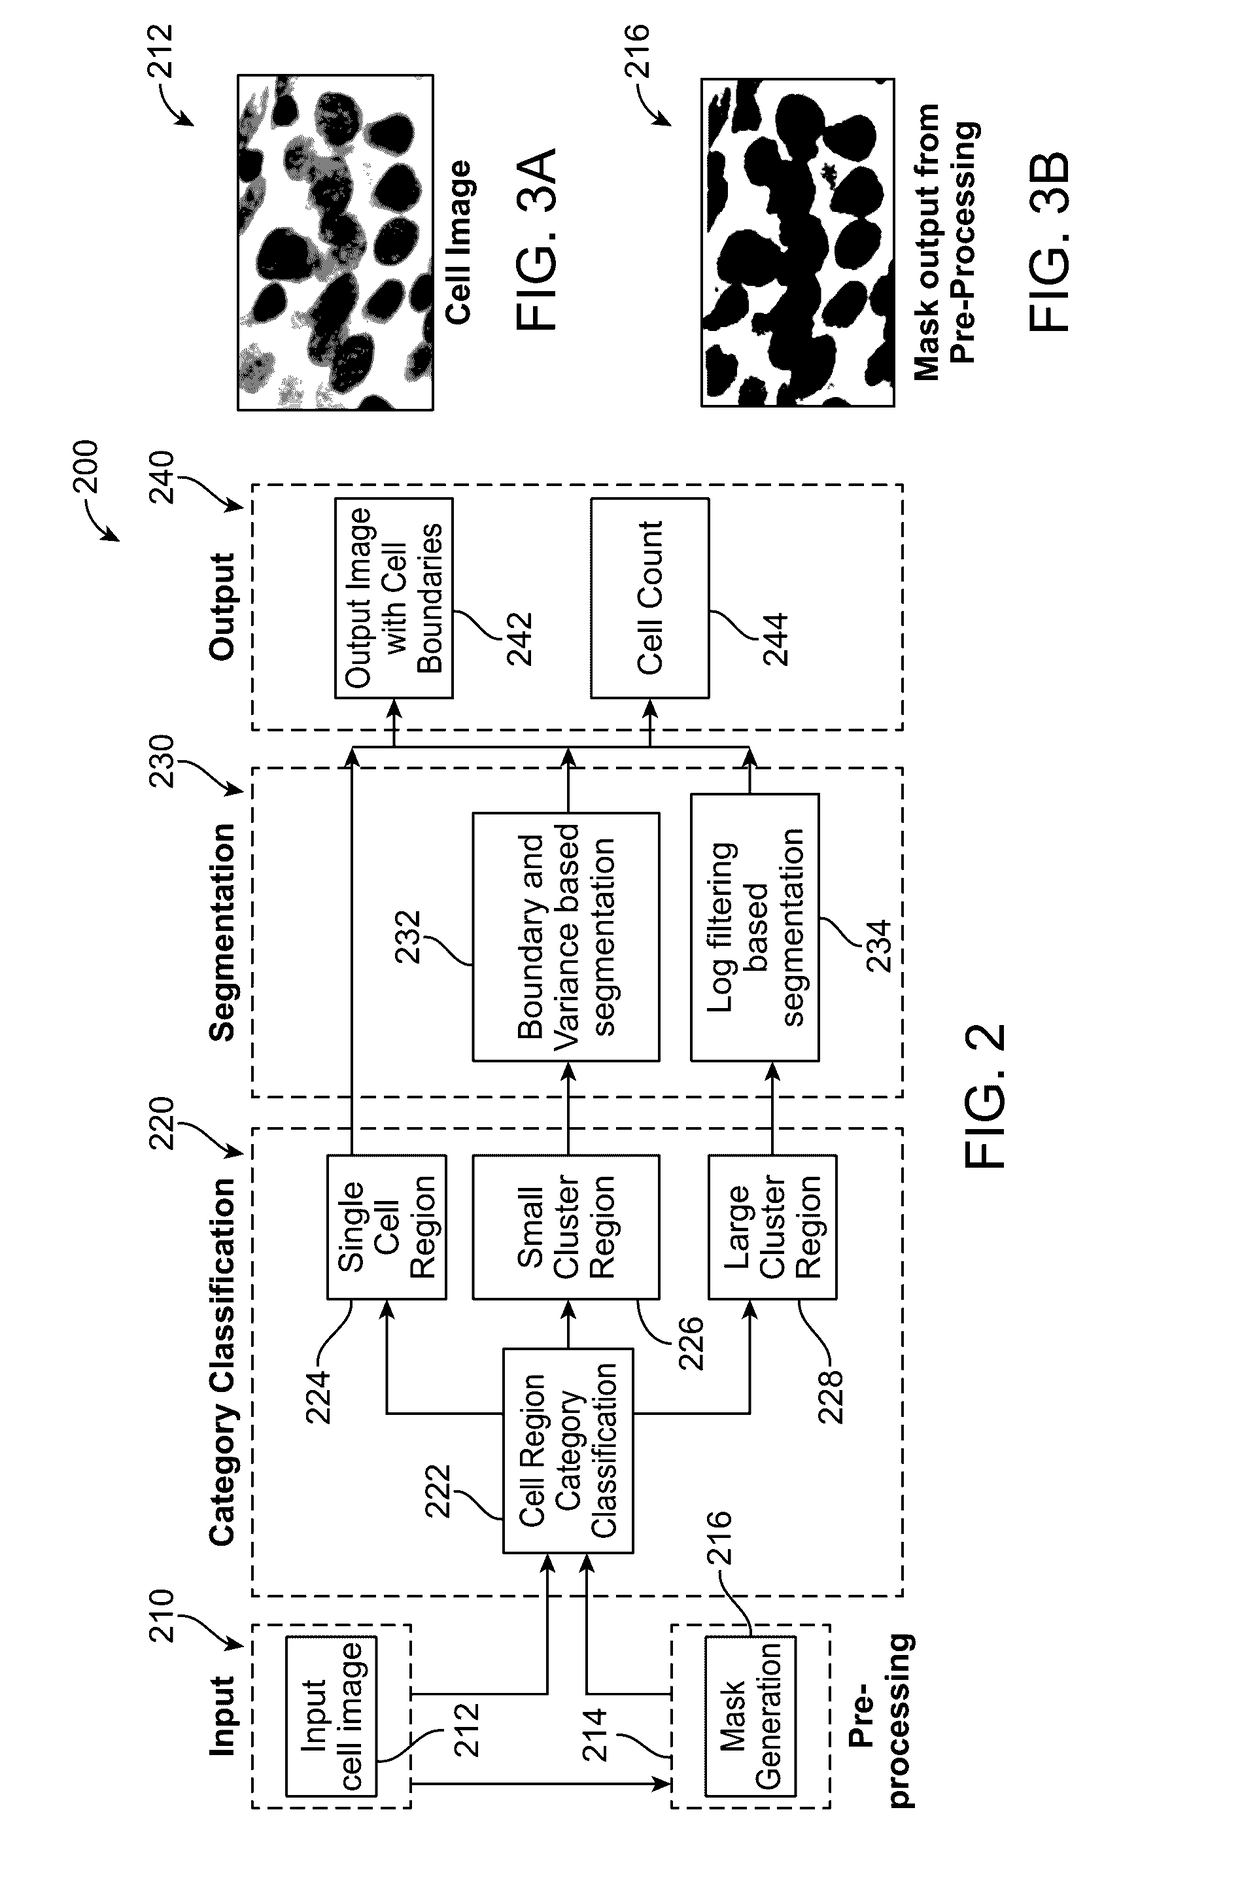 Method and system for automated analysis of cell images